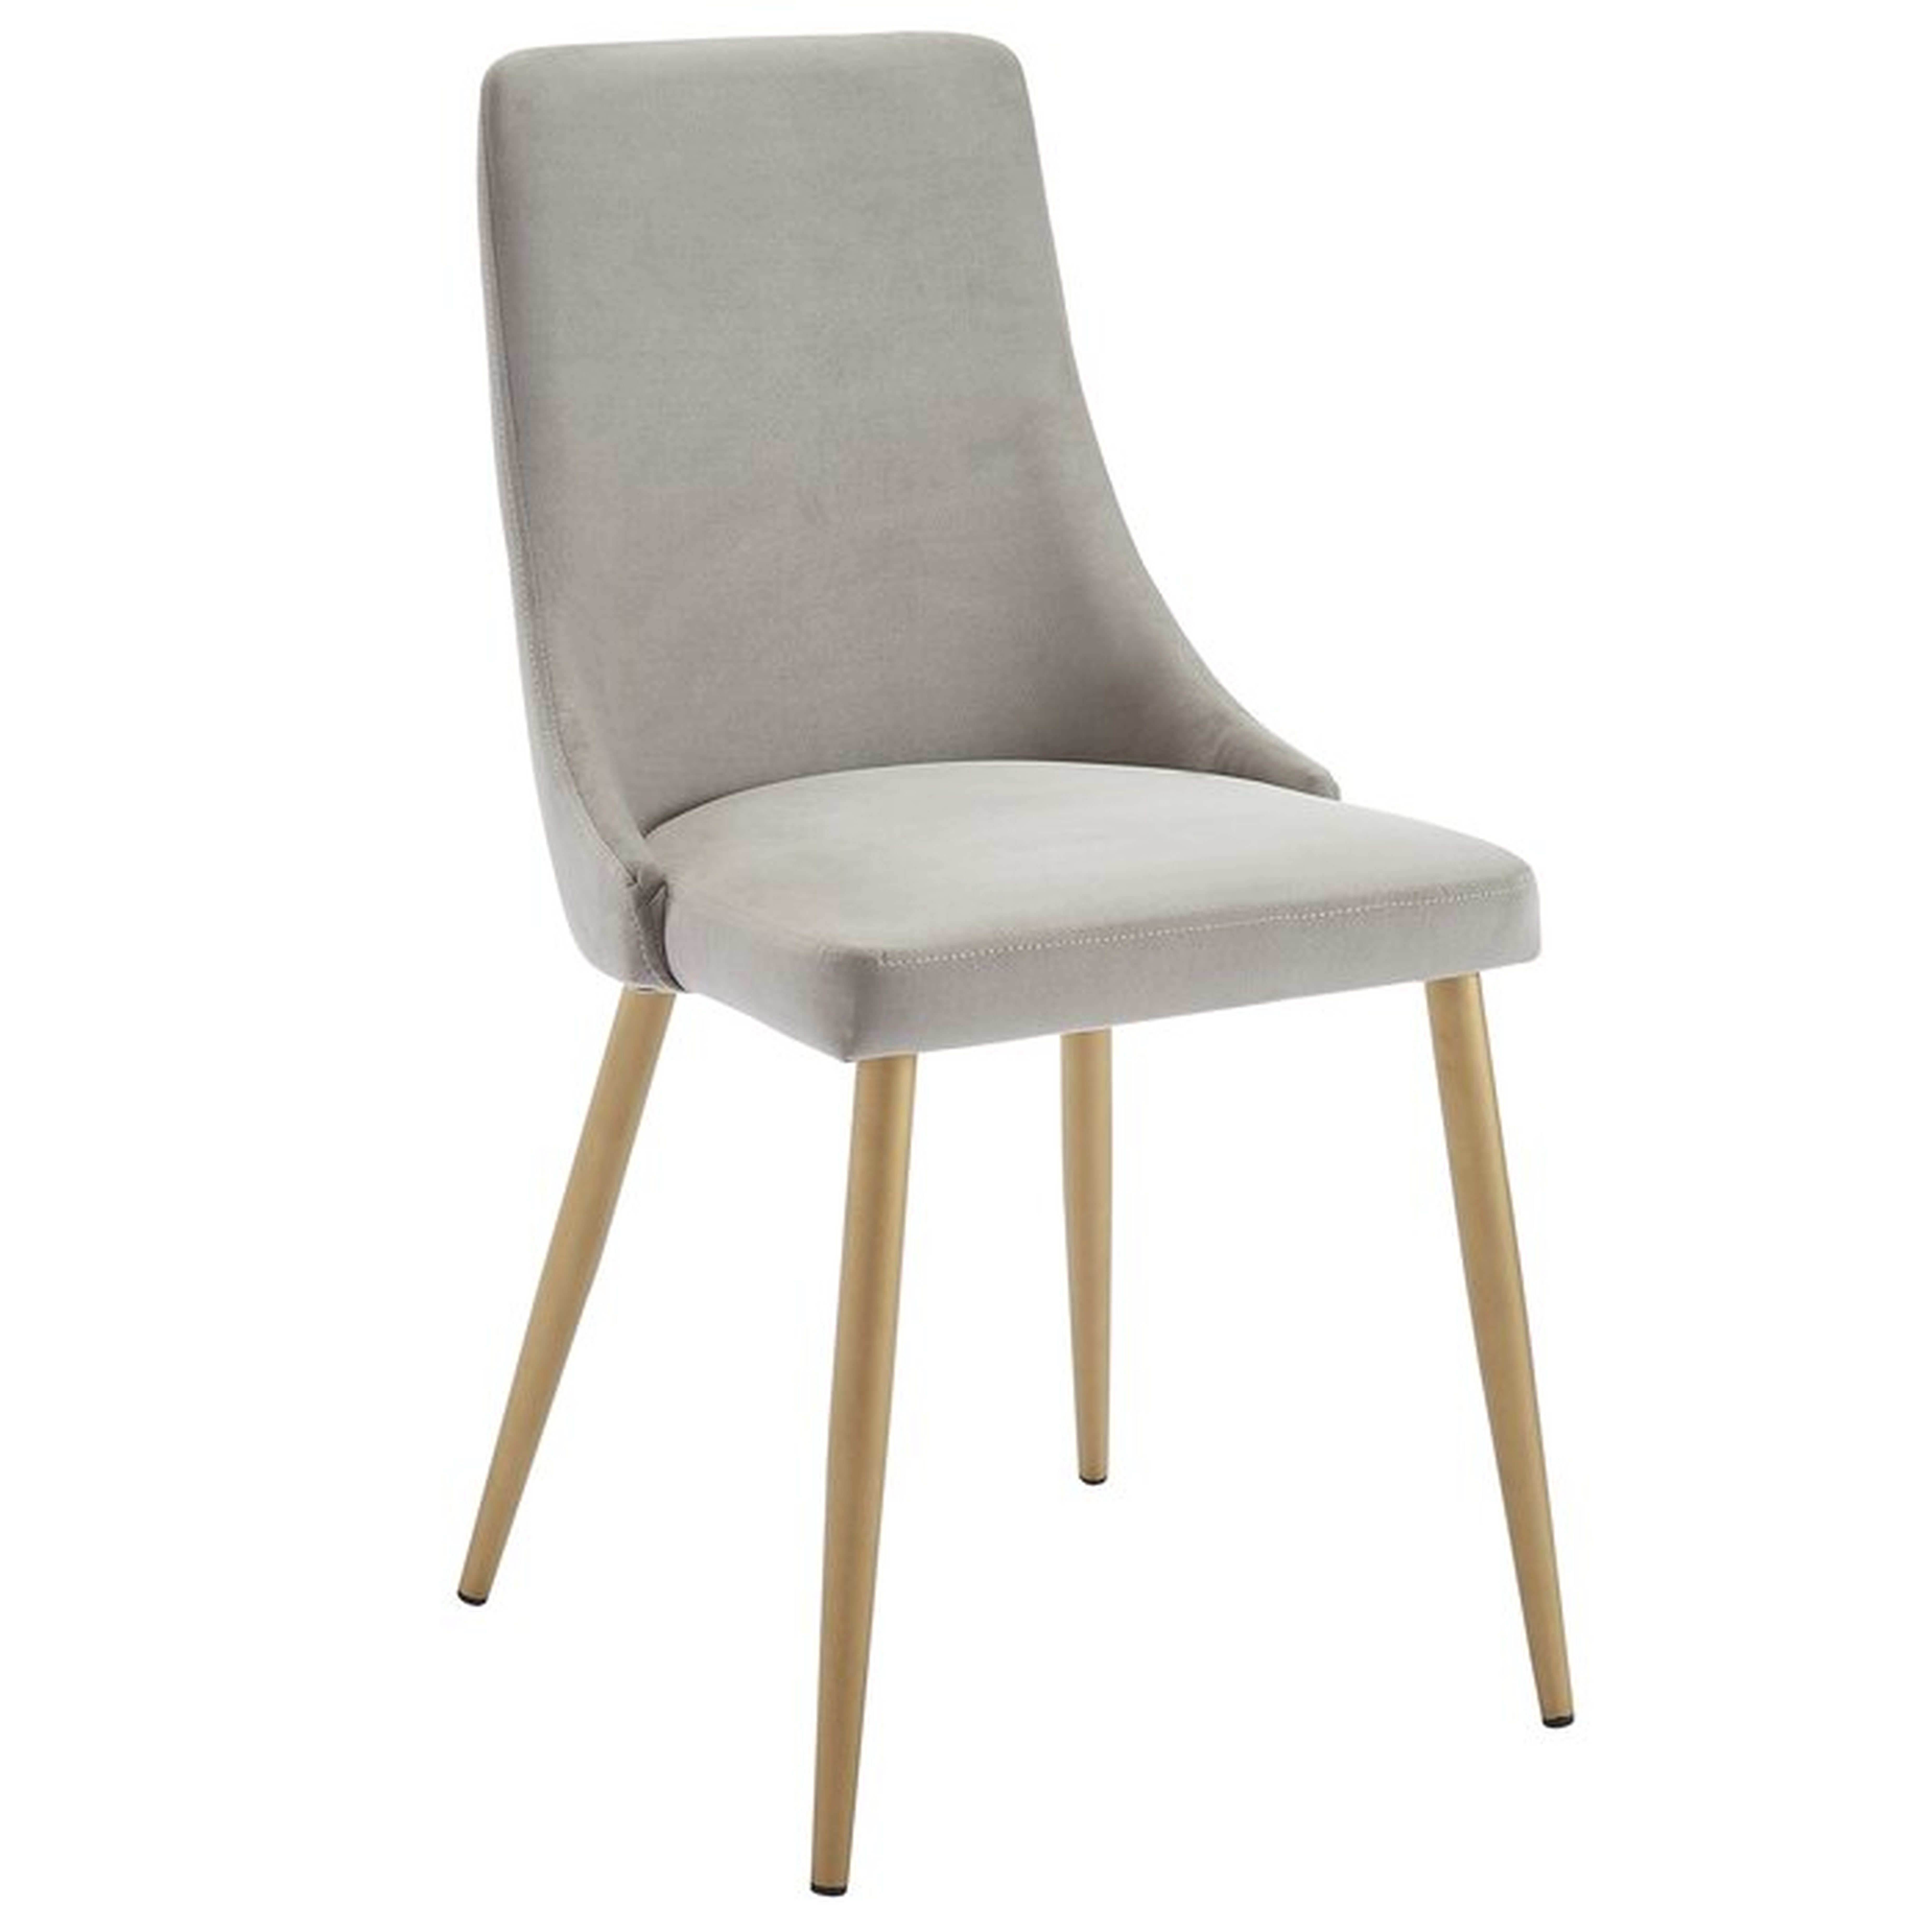 Neace Upholstered Dining Chair (set of 2) - Wayfair